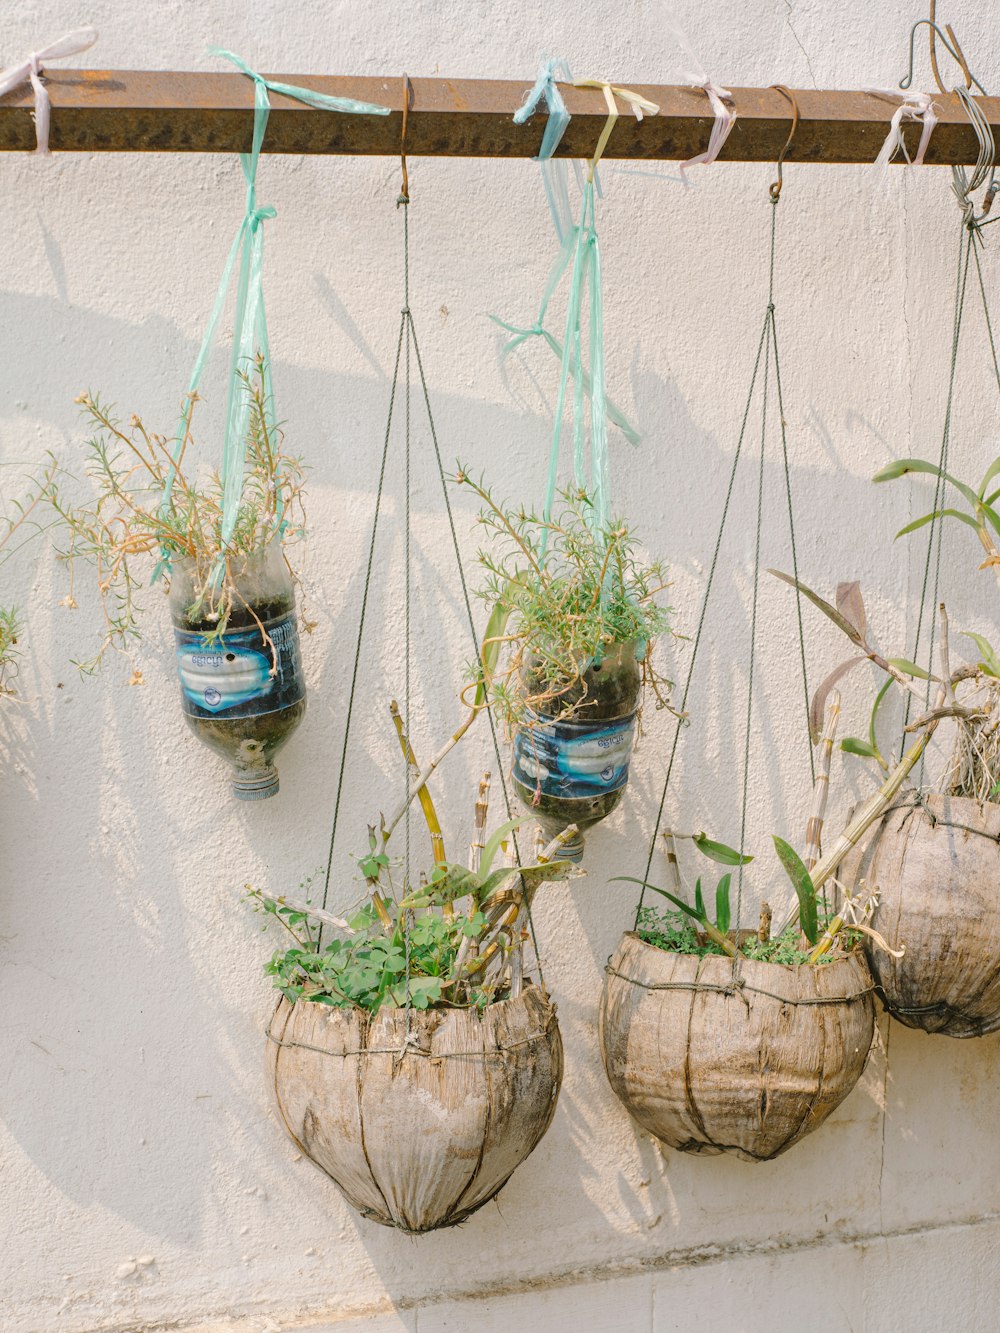 a group of hanging planters filled with plants